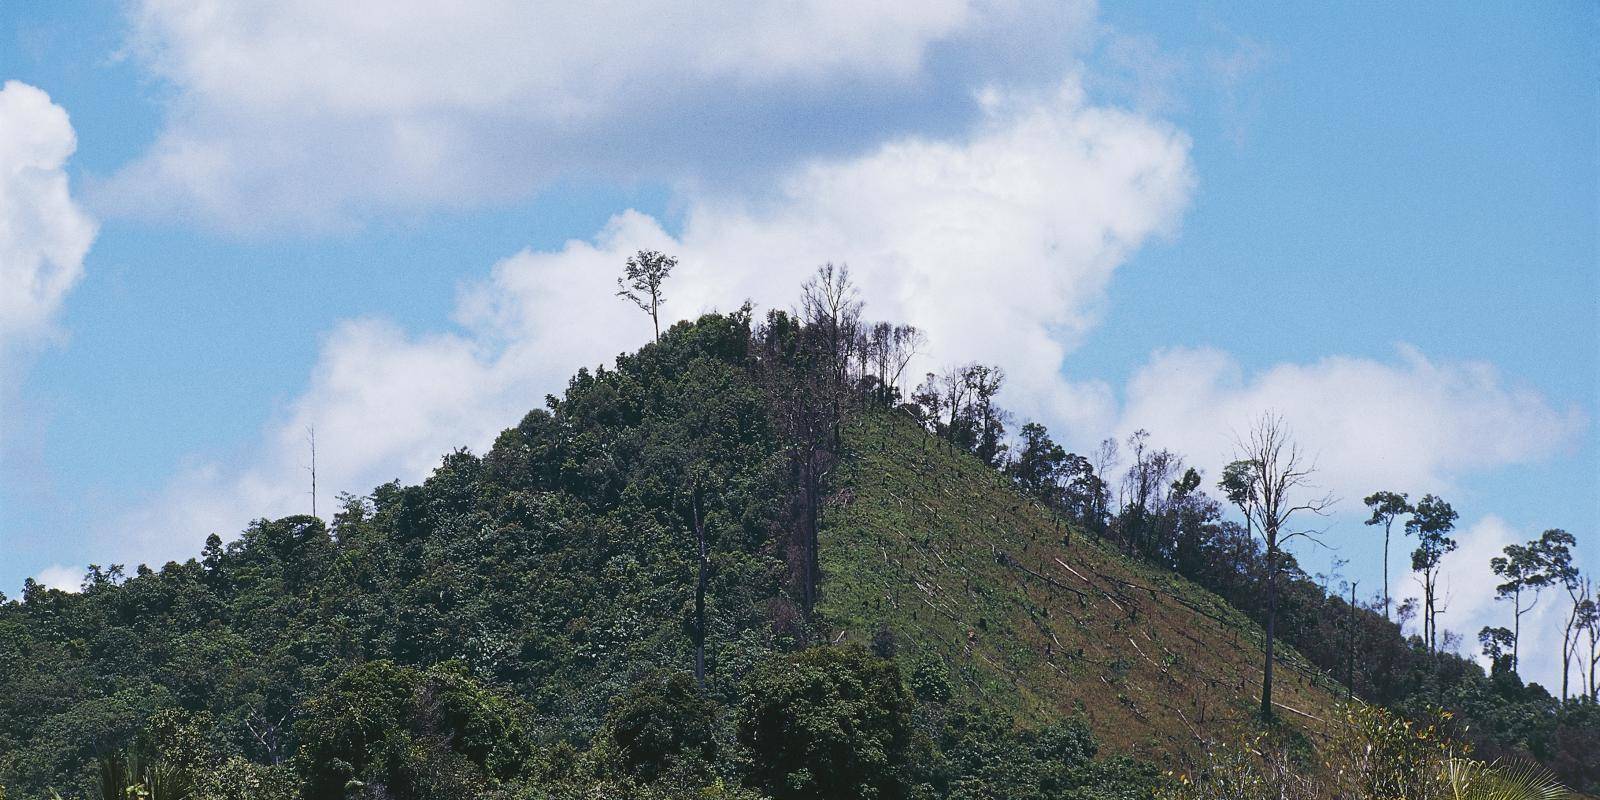 View of a conical hill where exactly half is covered in trees and half is bare.